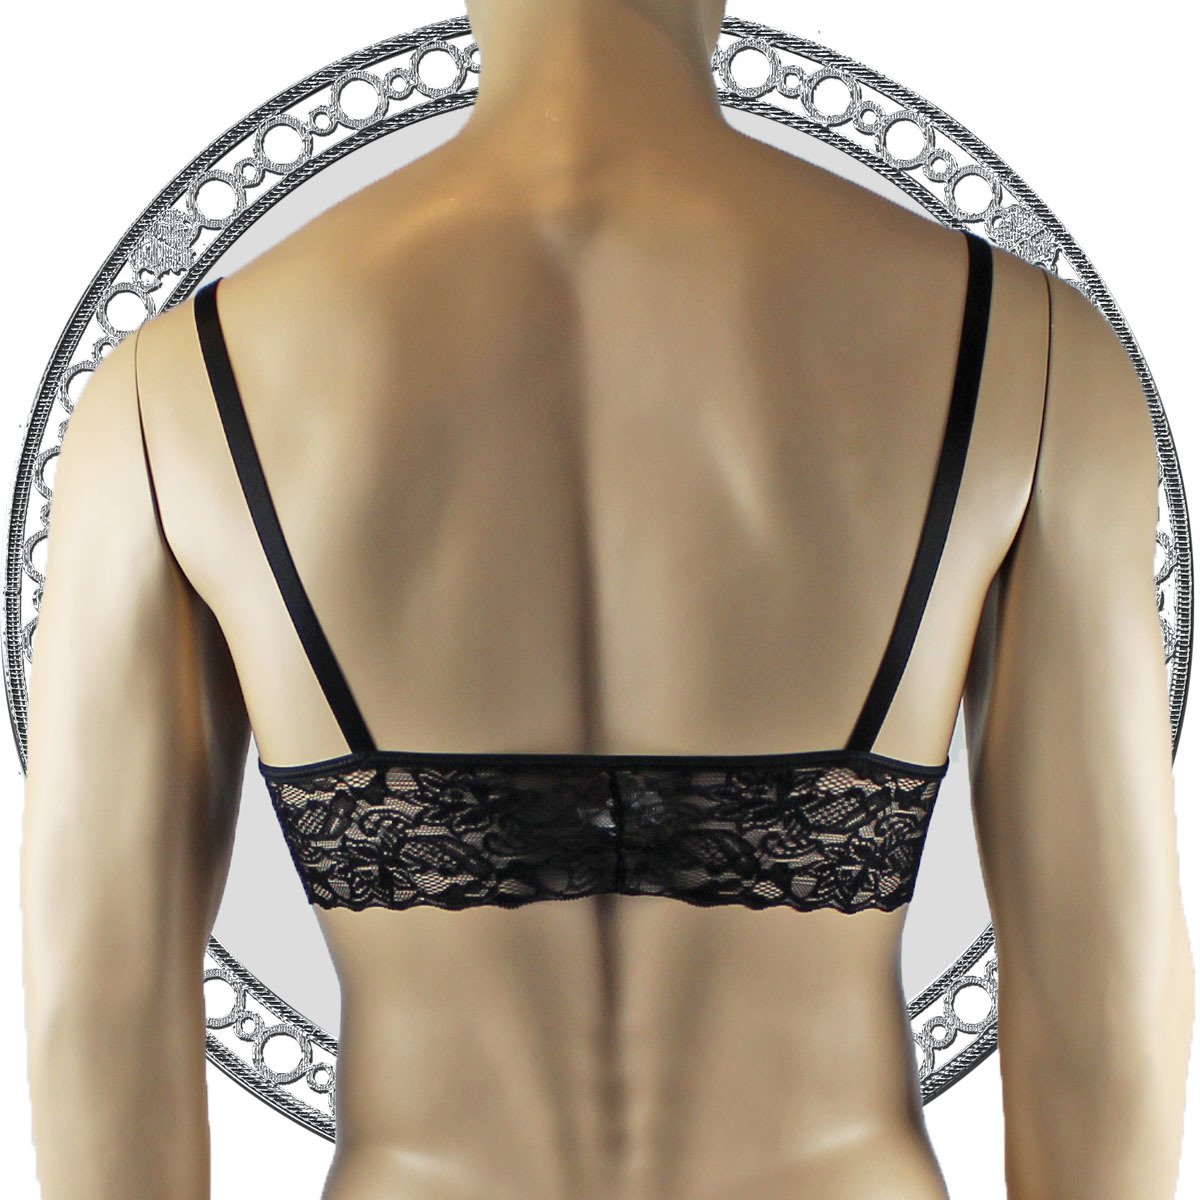 Mens Lace Bra Top Lingerie and Thong for Men Blue and Black